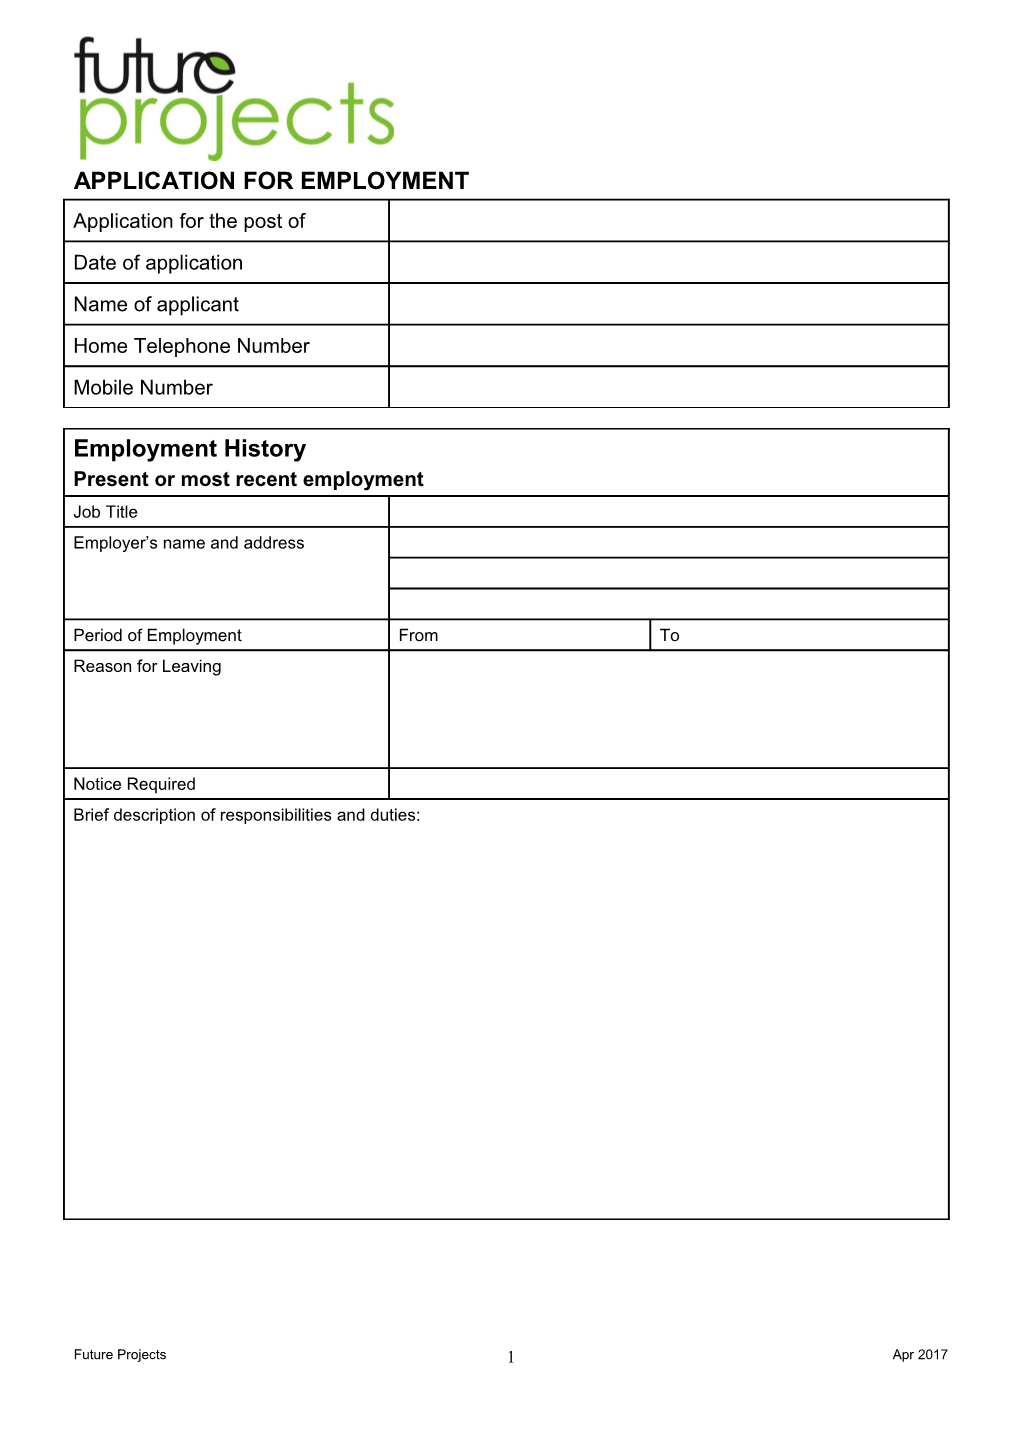 Application for Employment s141